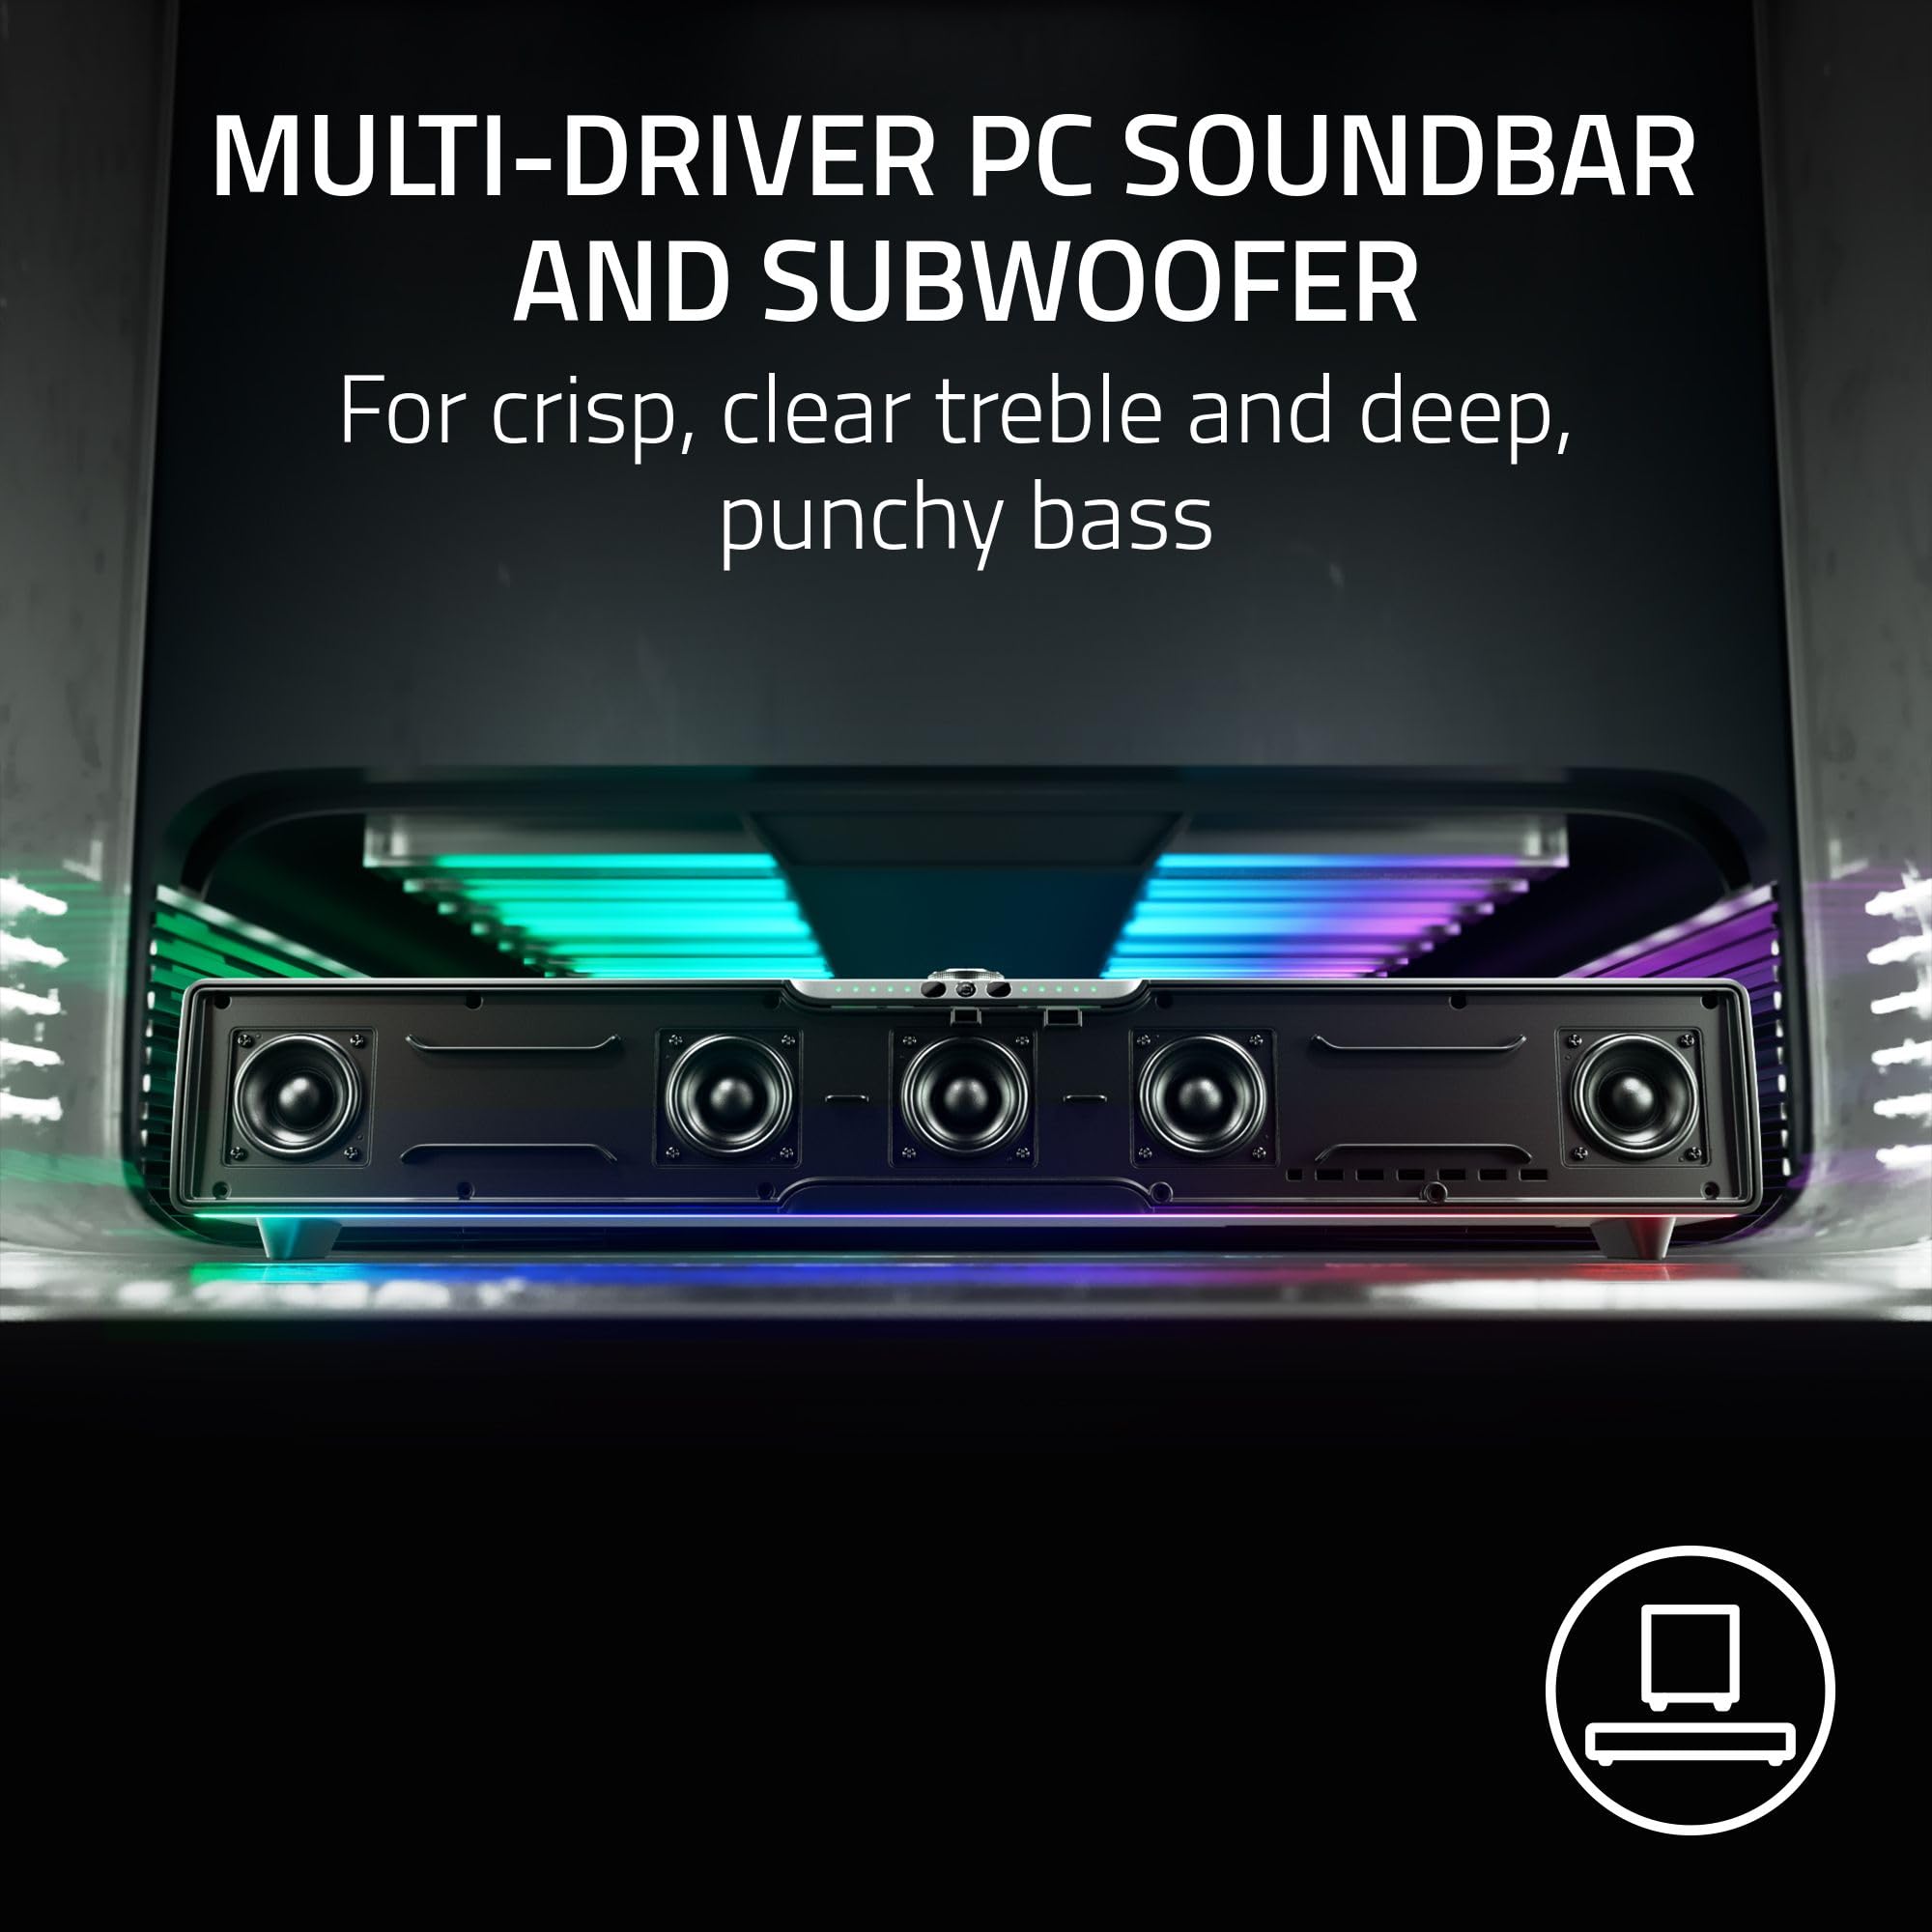 Razer Leviathan V2 Pro: Multi-Driver PC Gaming Soundbar with Subwoofer - Beamforming Surround Sound with AI Head Tracking - Chroma RGB - Bluetooth 5.0 & 3.5mm - for PC, Desktop/Laptop, Mobile, Switch